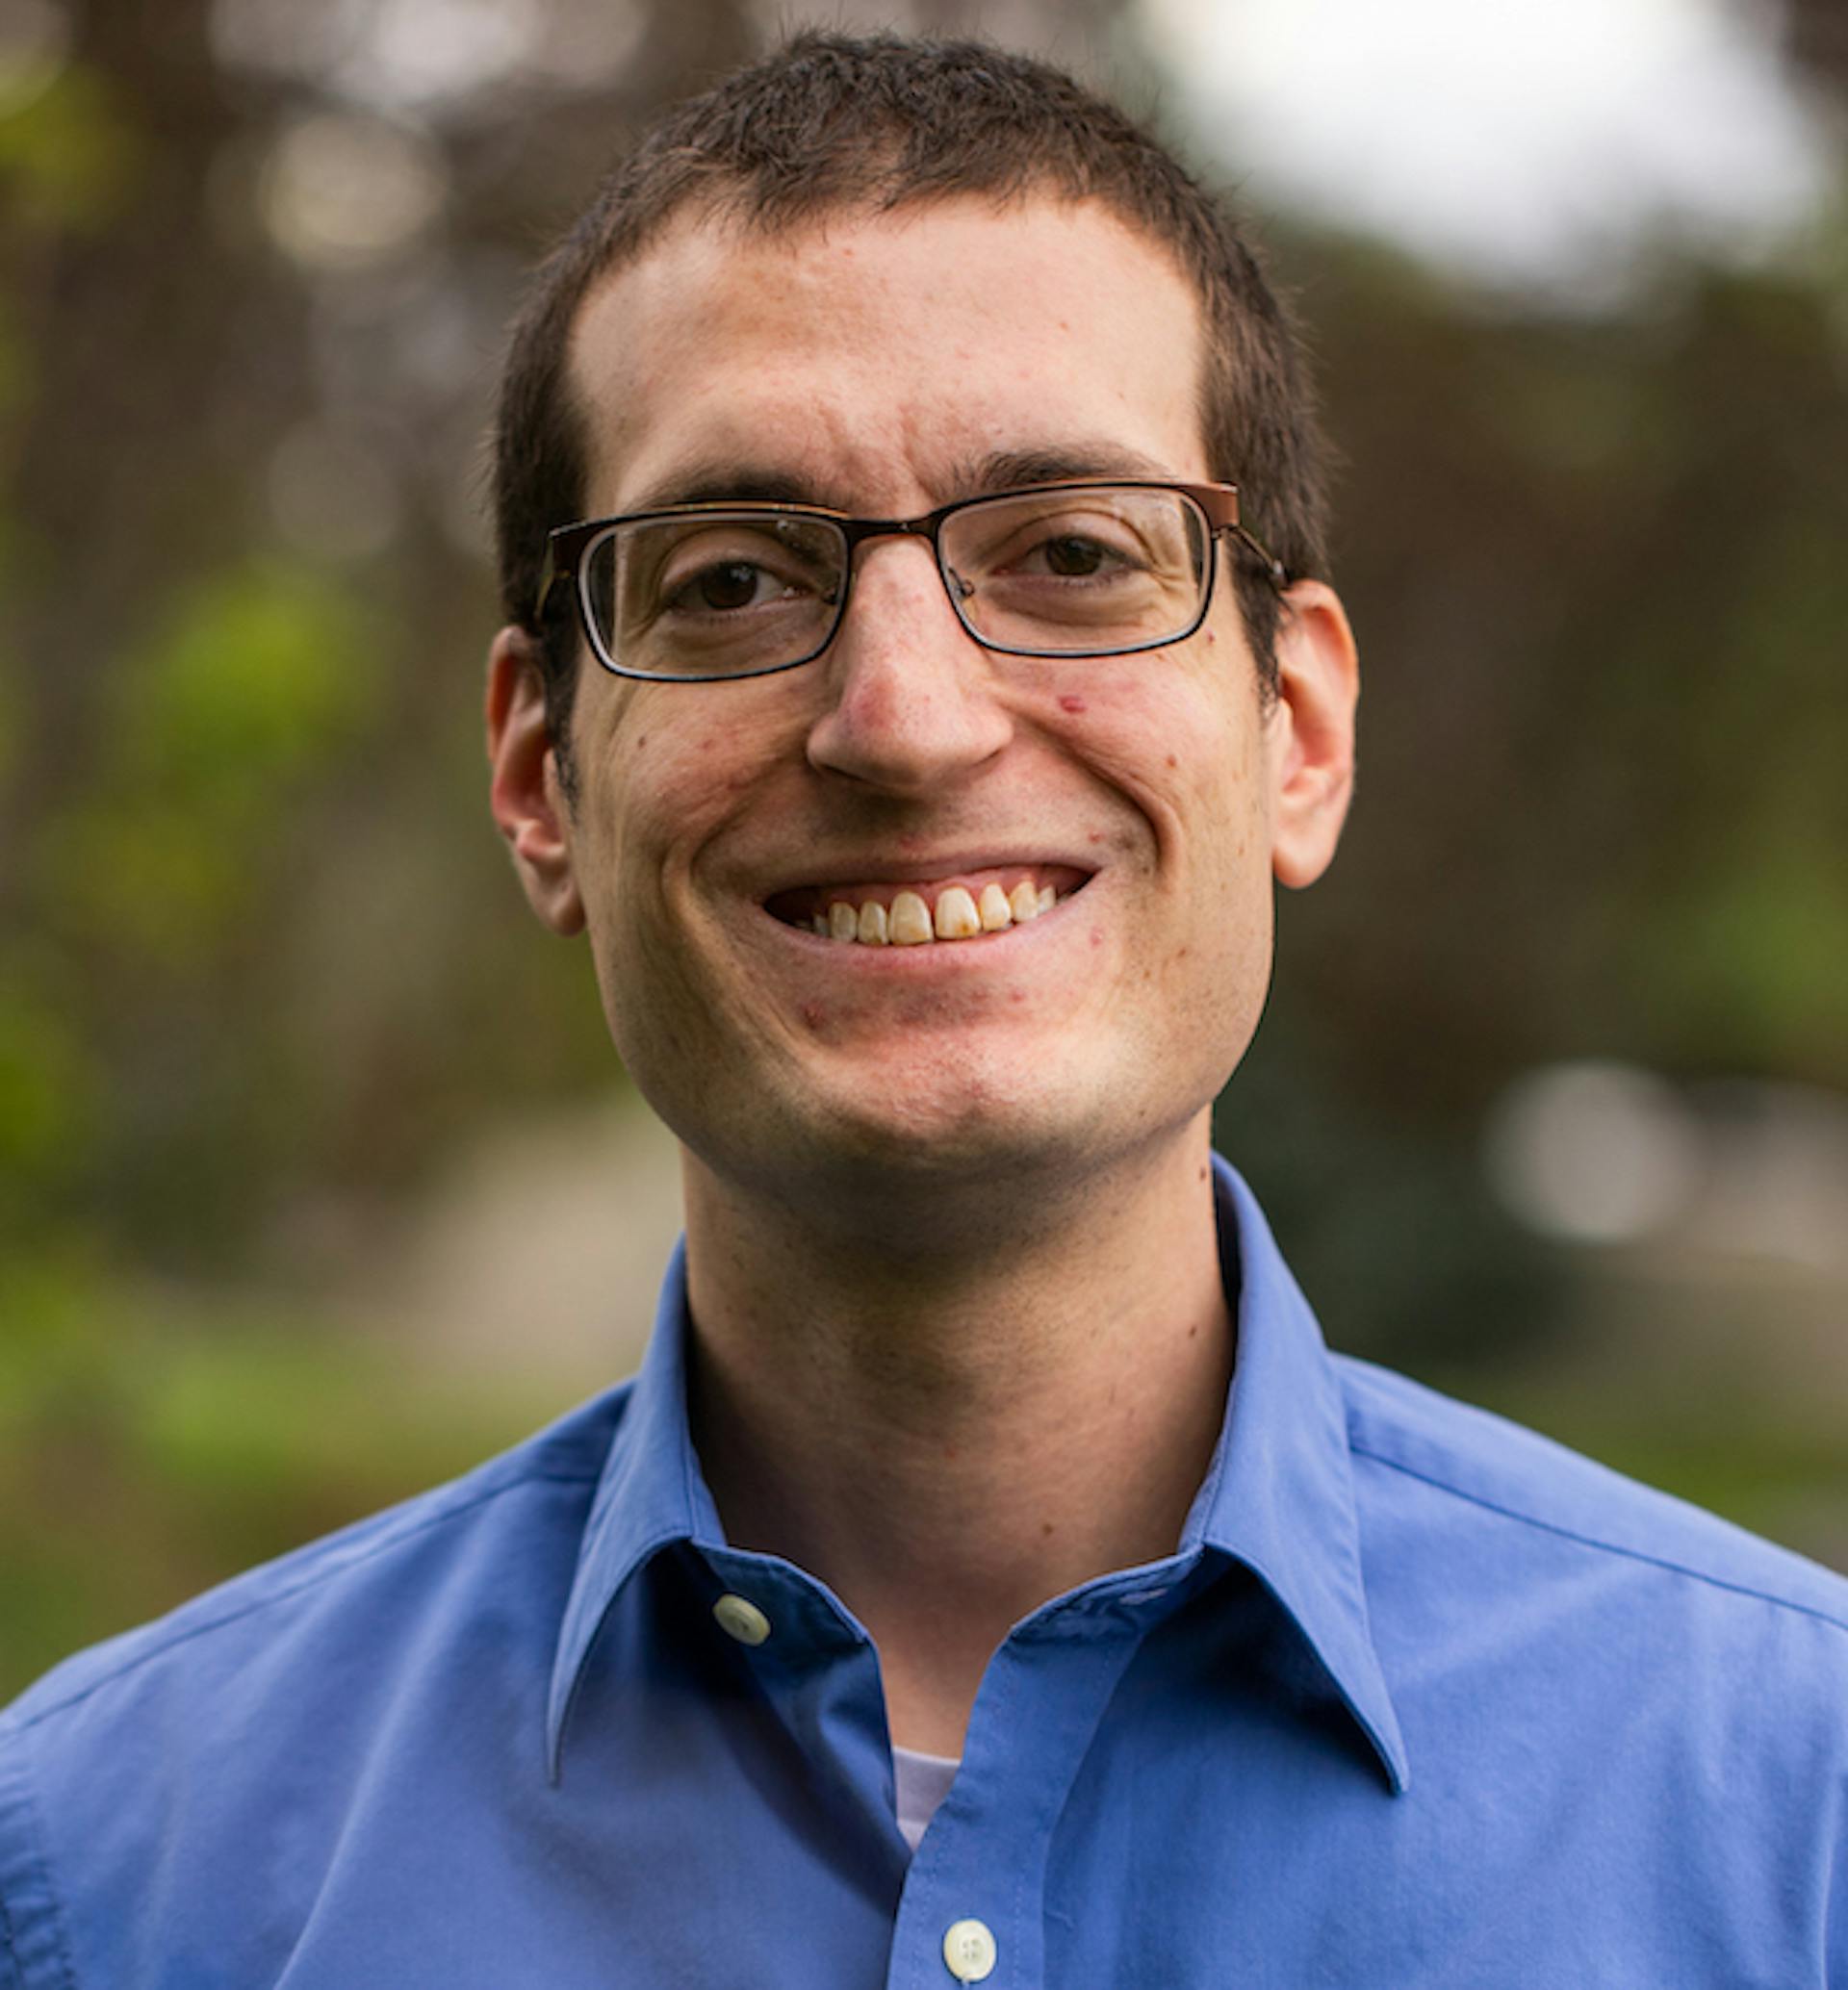 A portrait of Anthony Campolo in a blue shirt, smiling.